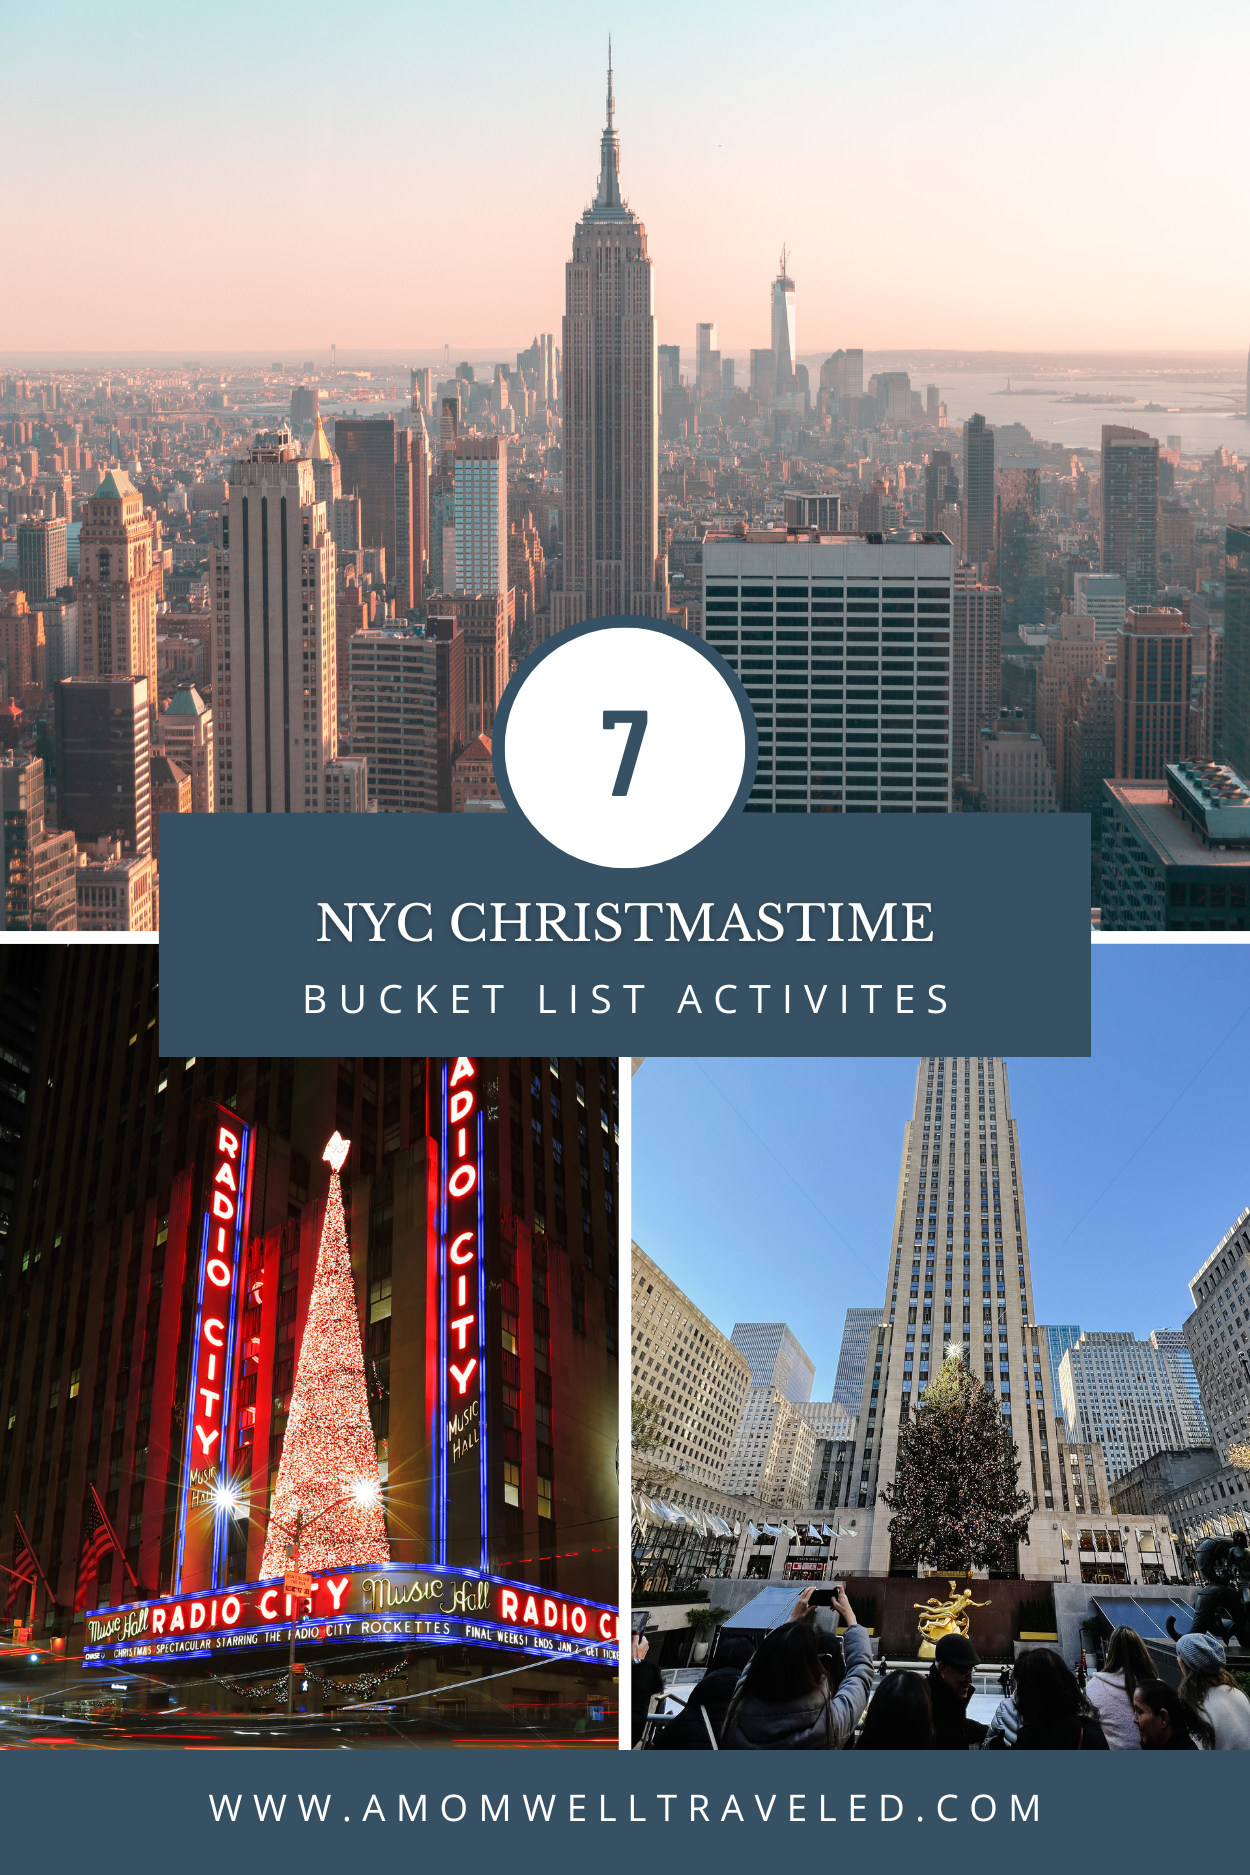 NYC Christmastime Bucket List things to do--ice skating, festive shows, top of the rock, and more